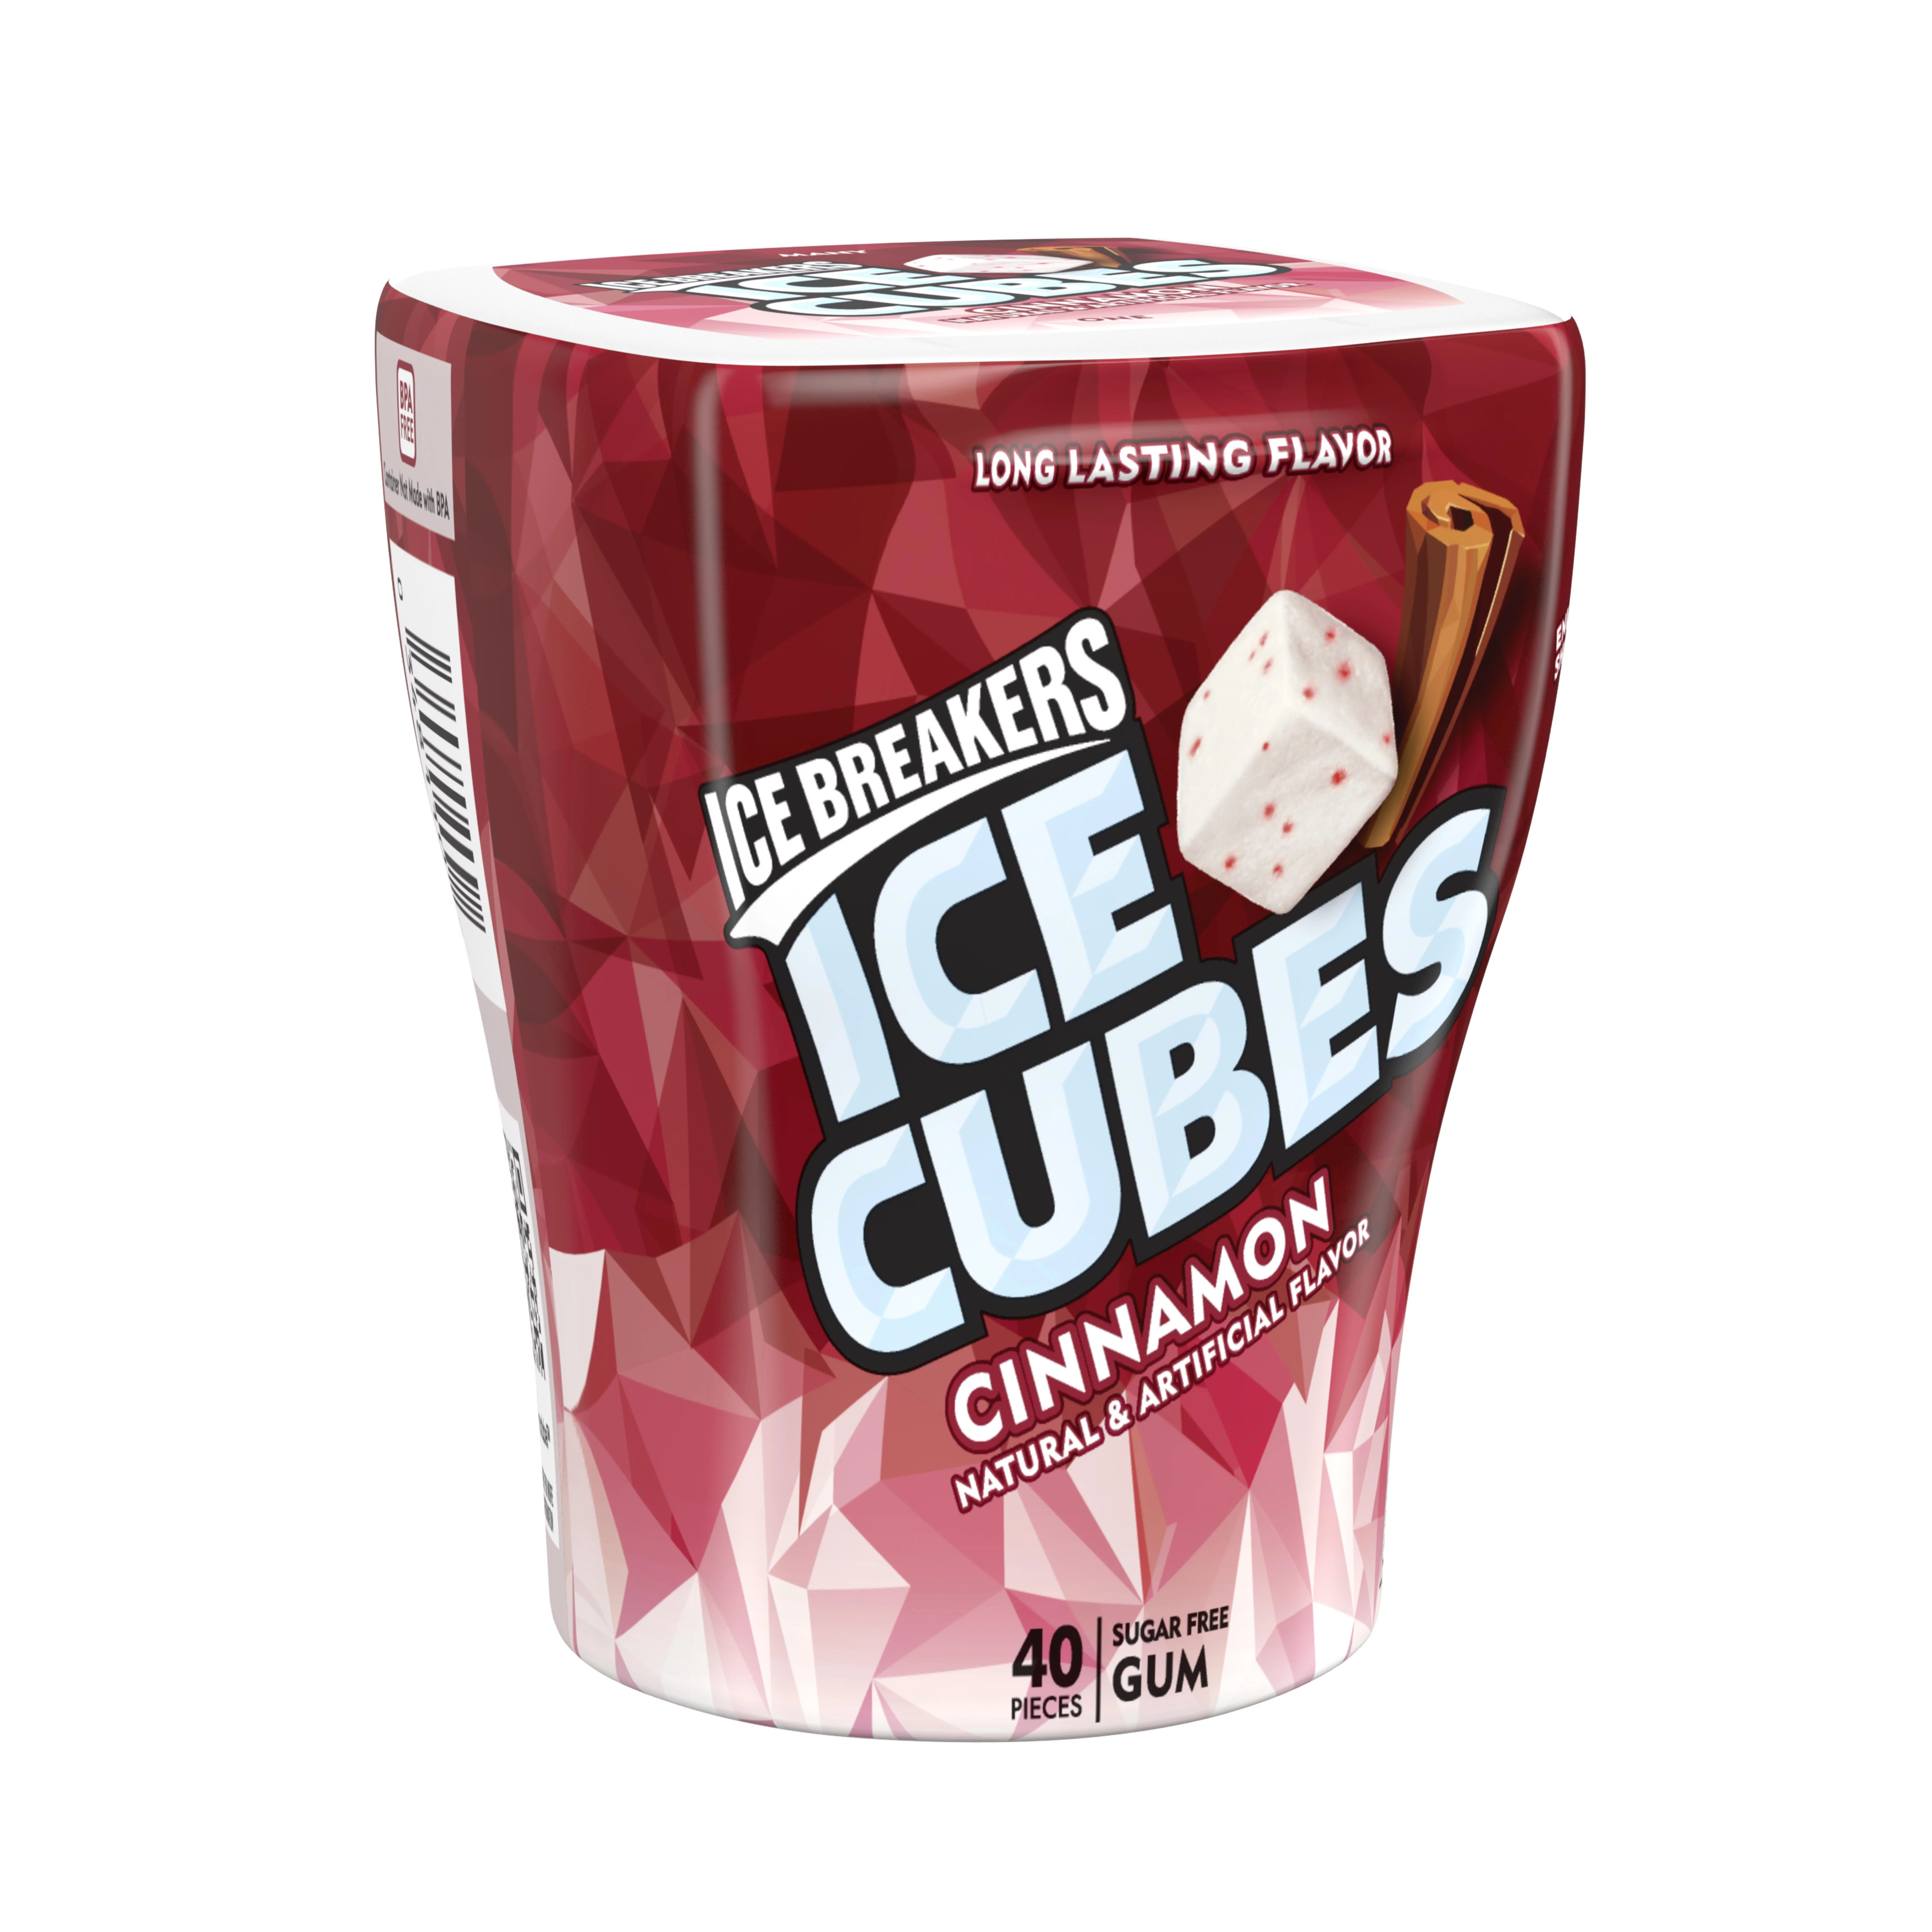 Ice Breakers Ice Cubes Cinnamon Sugar Free Chewing Gum, Bottle 3.24 oz, 40 Pieces